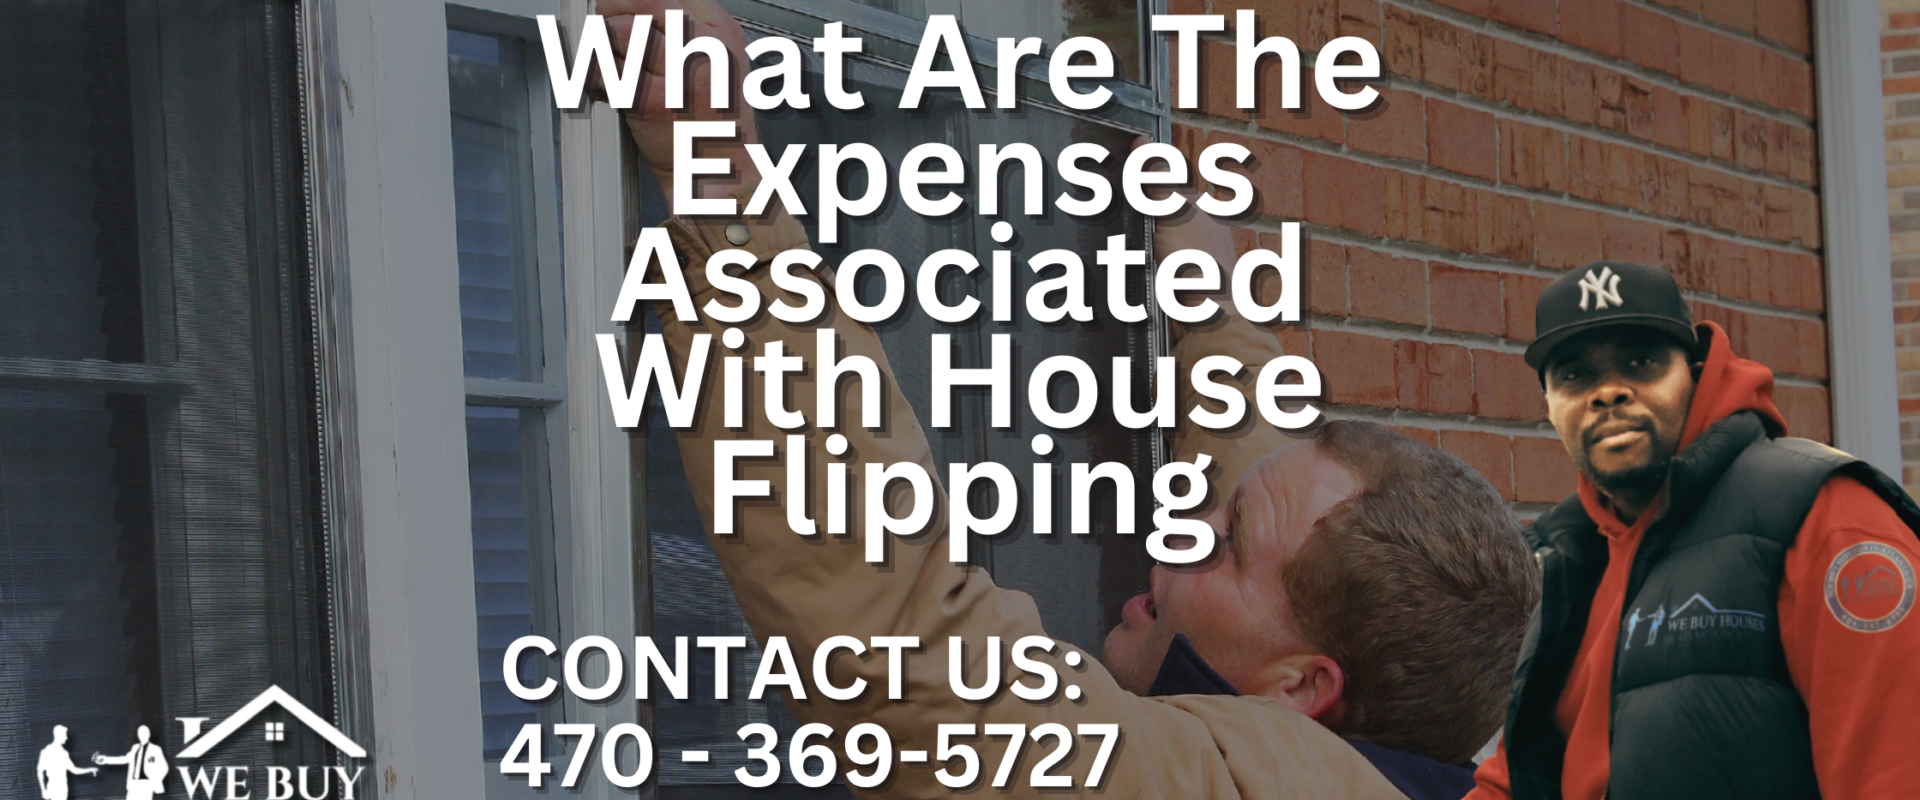 What-Are-The-Expenses-Associated-With-House-Flipping